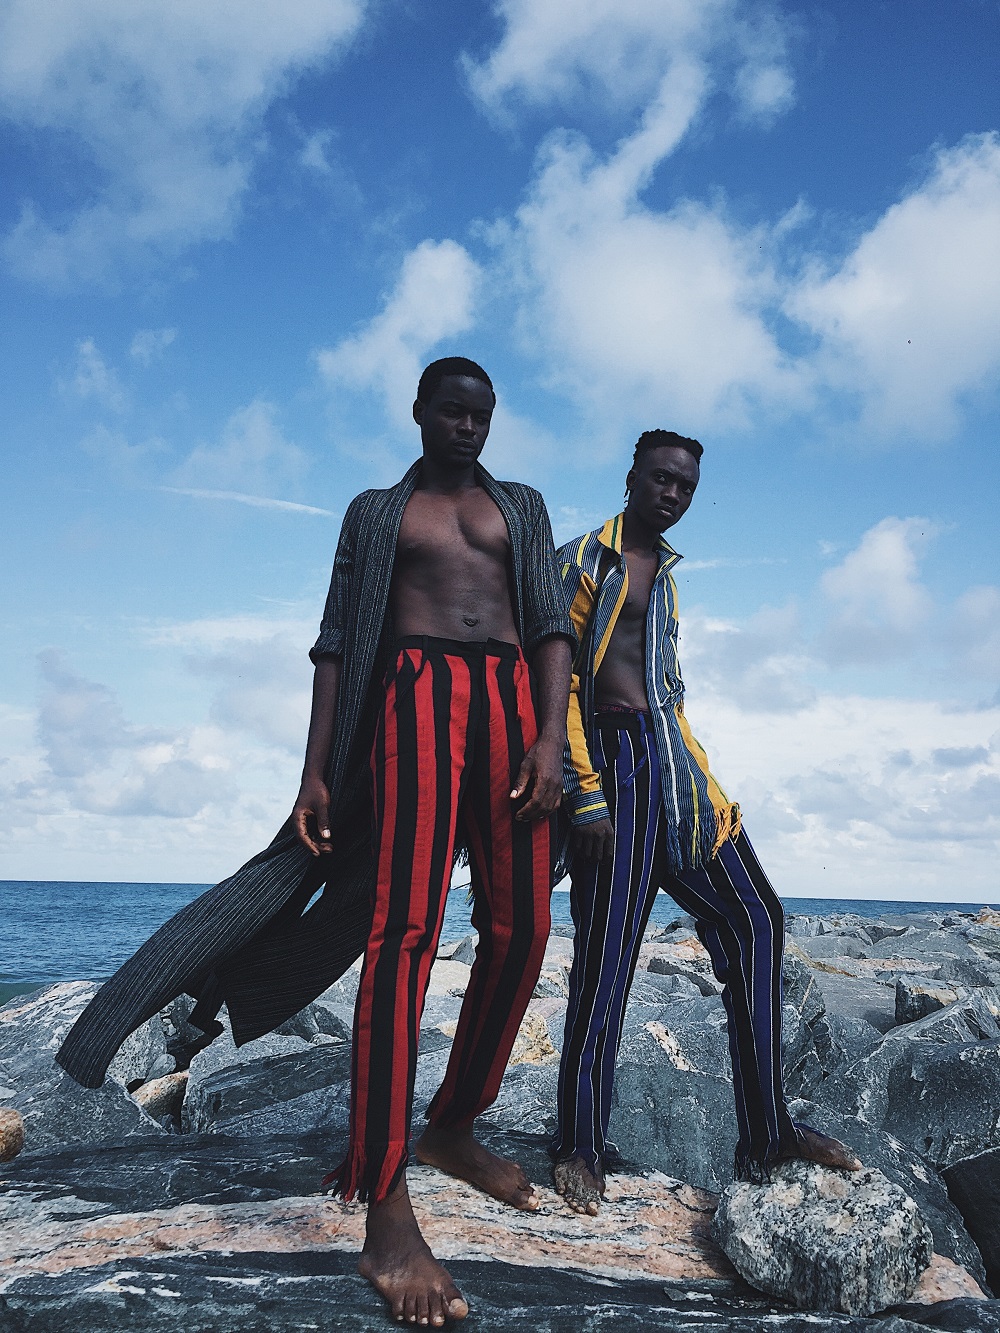 You Need To See Gravalot’s Afro-Contemporary “Child Of The Sun” Collection